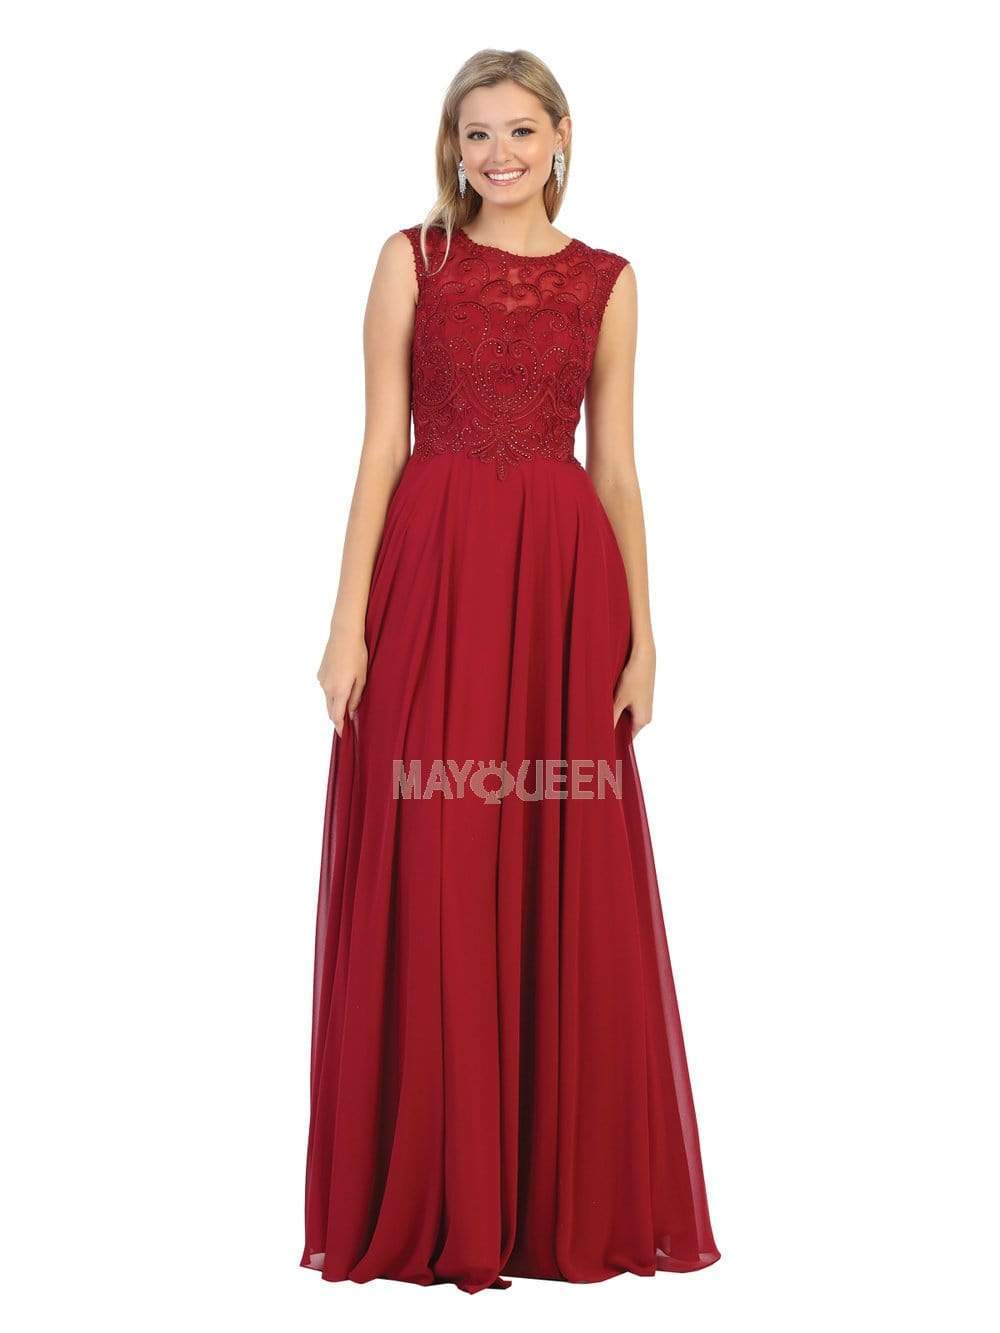 Image of May Queen - MQ1707 Swirl Motif Embroidered Chiffon Dress